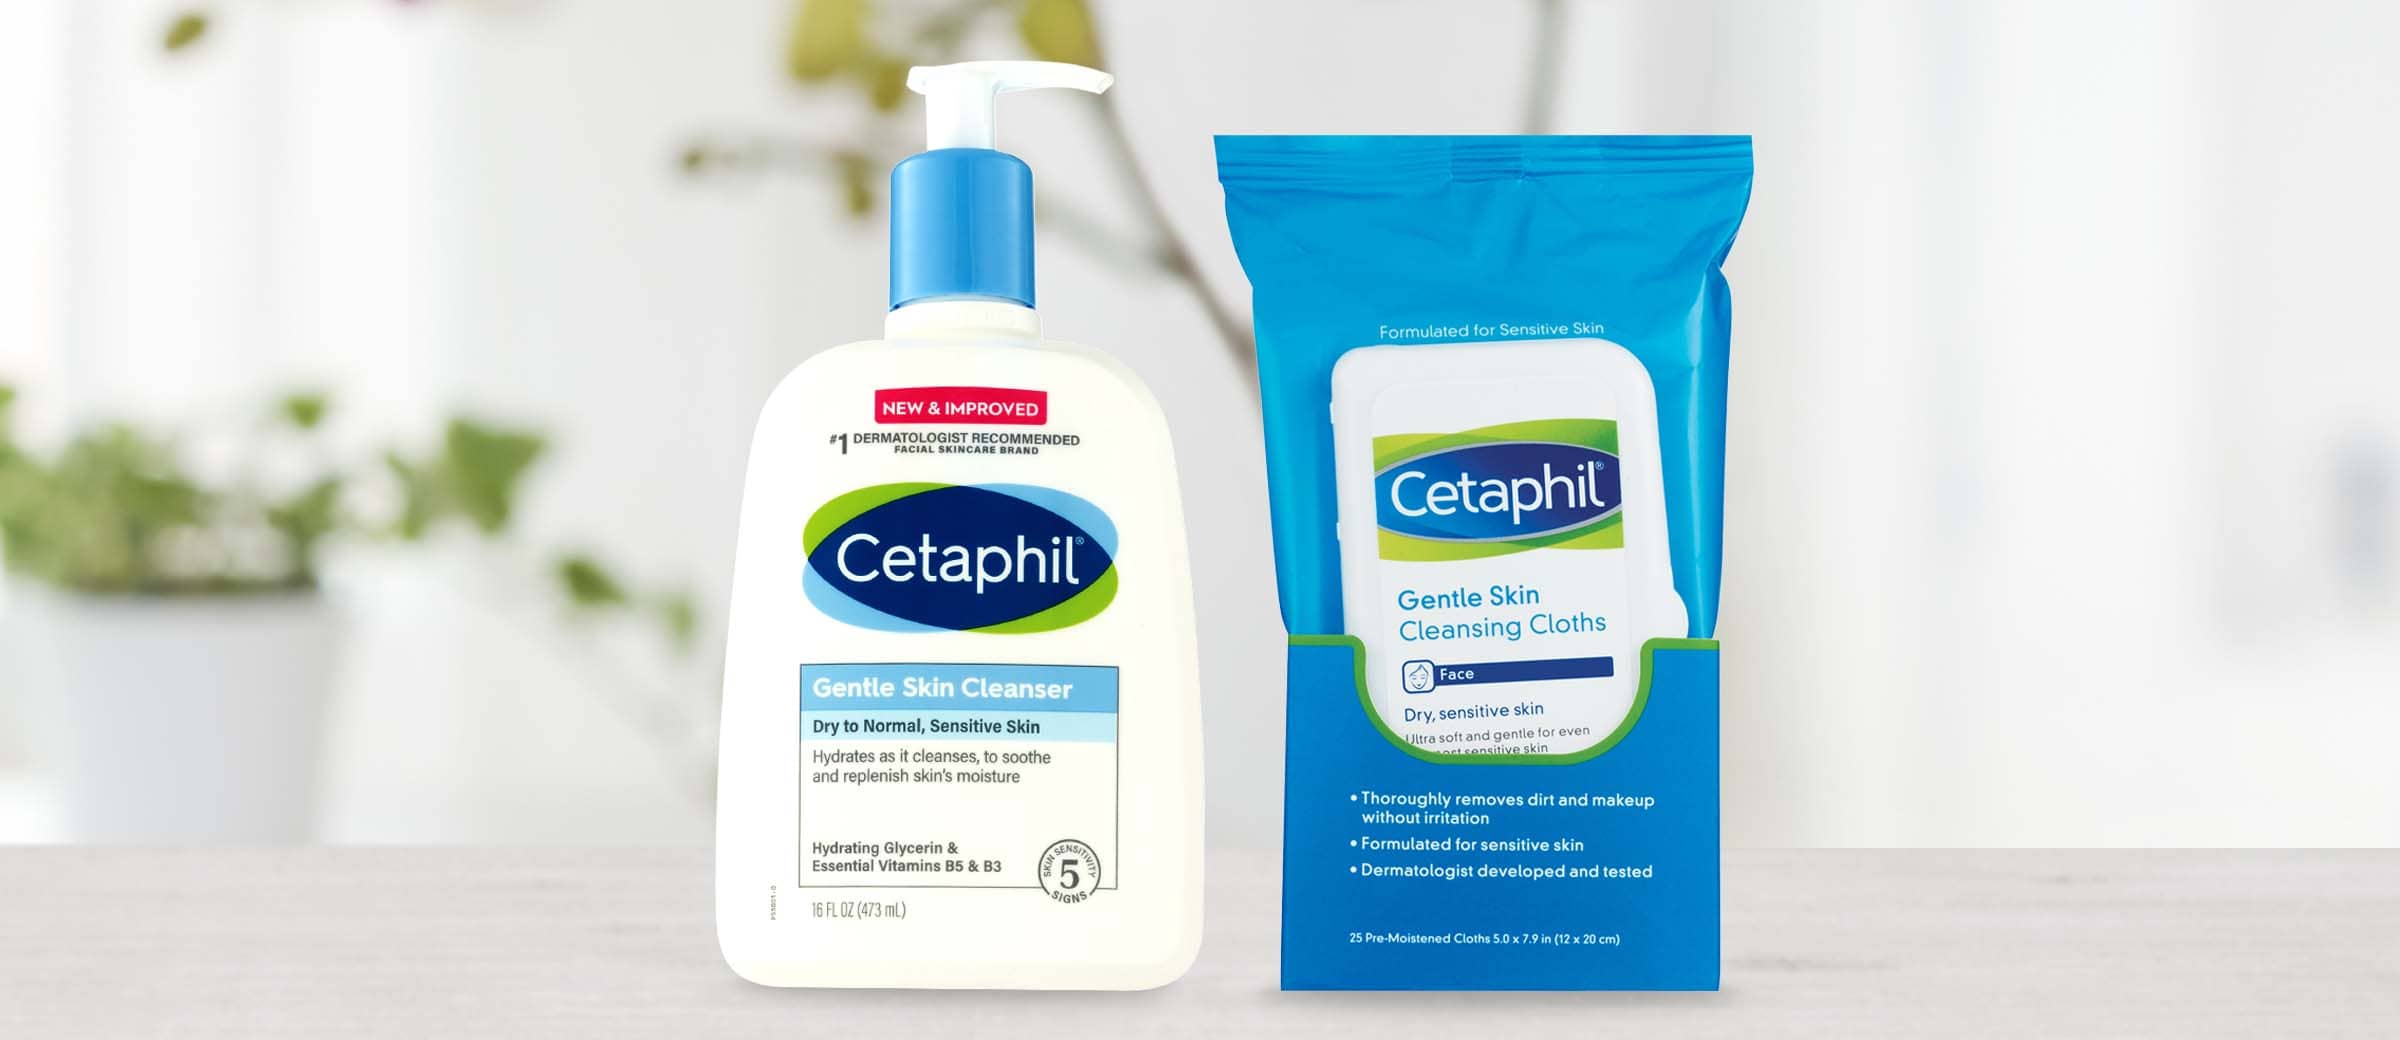 Cetaphil facial care products